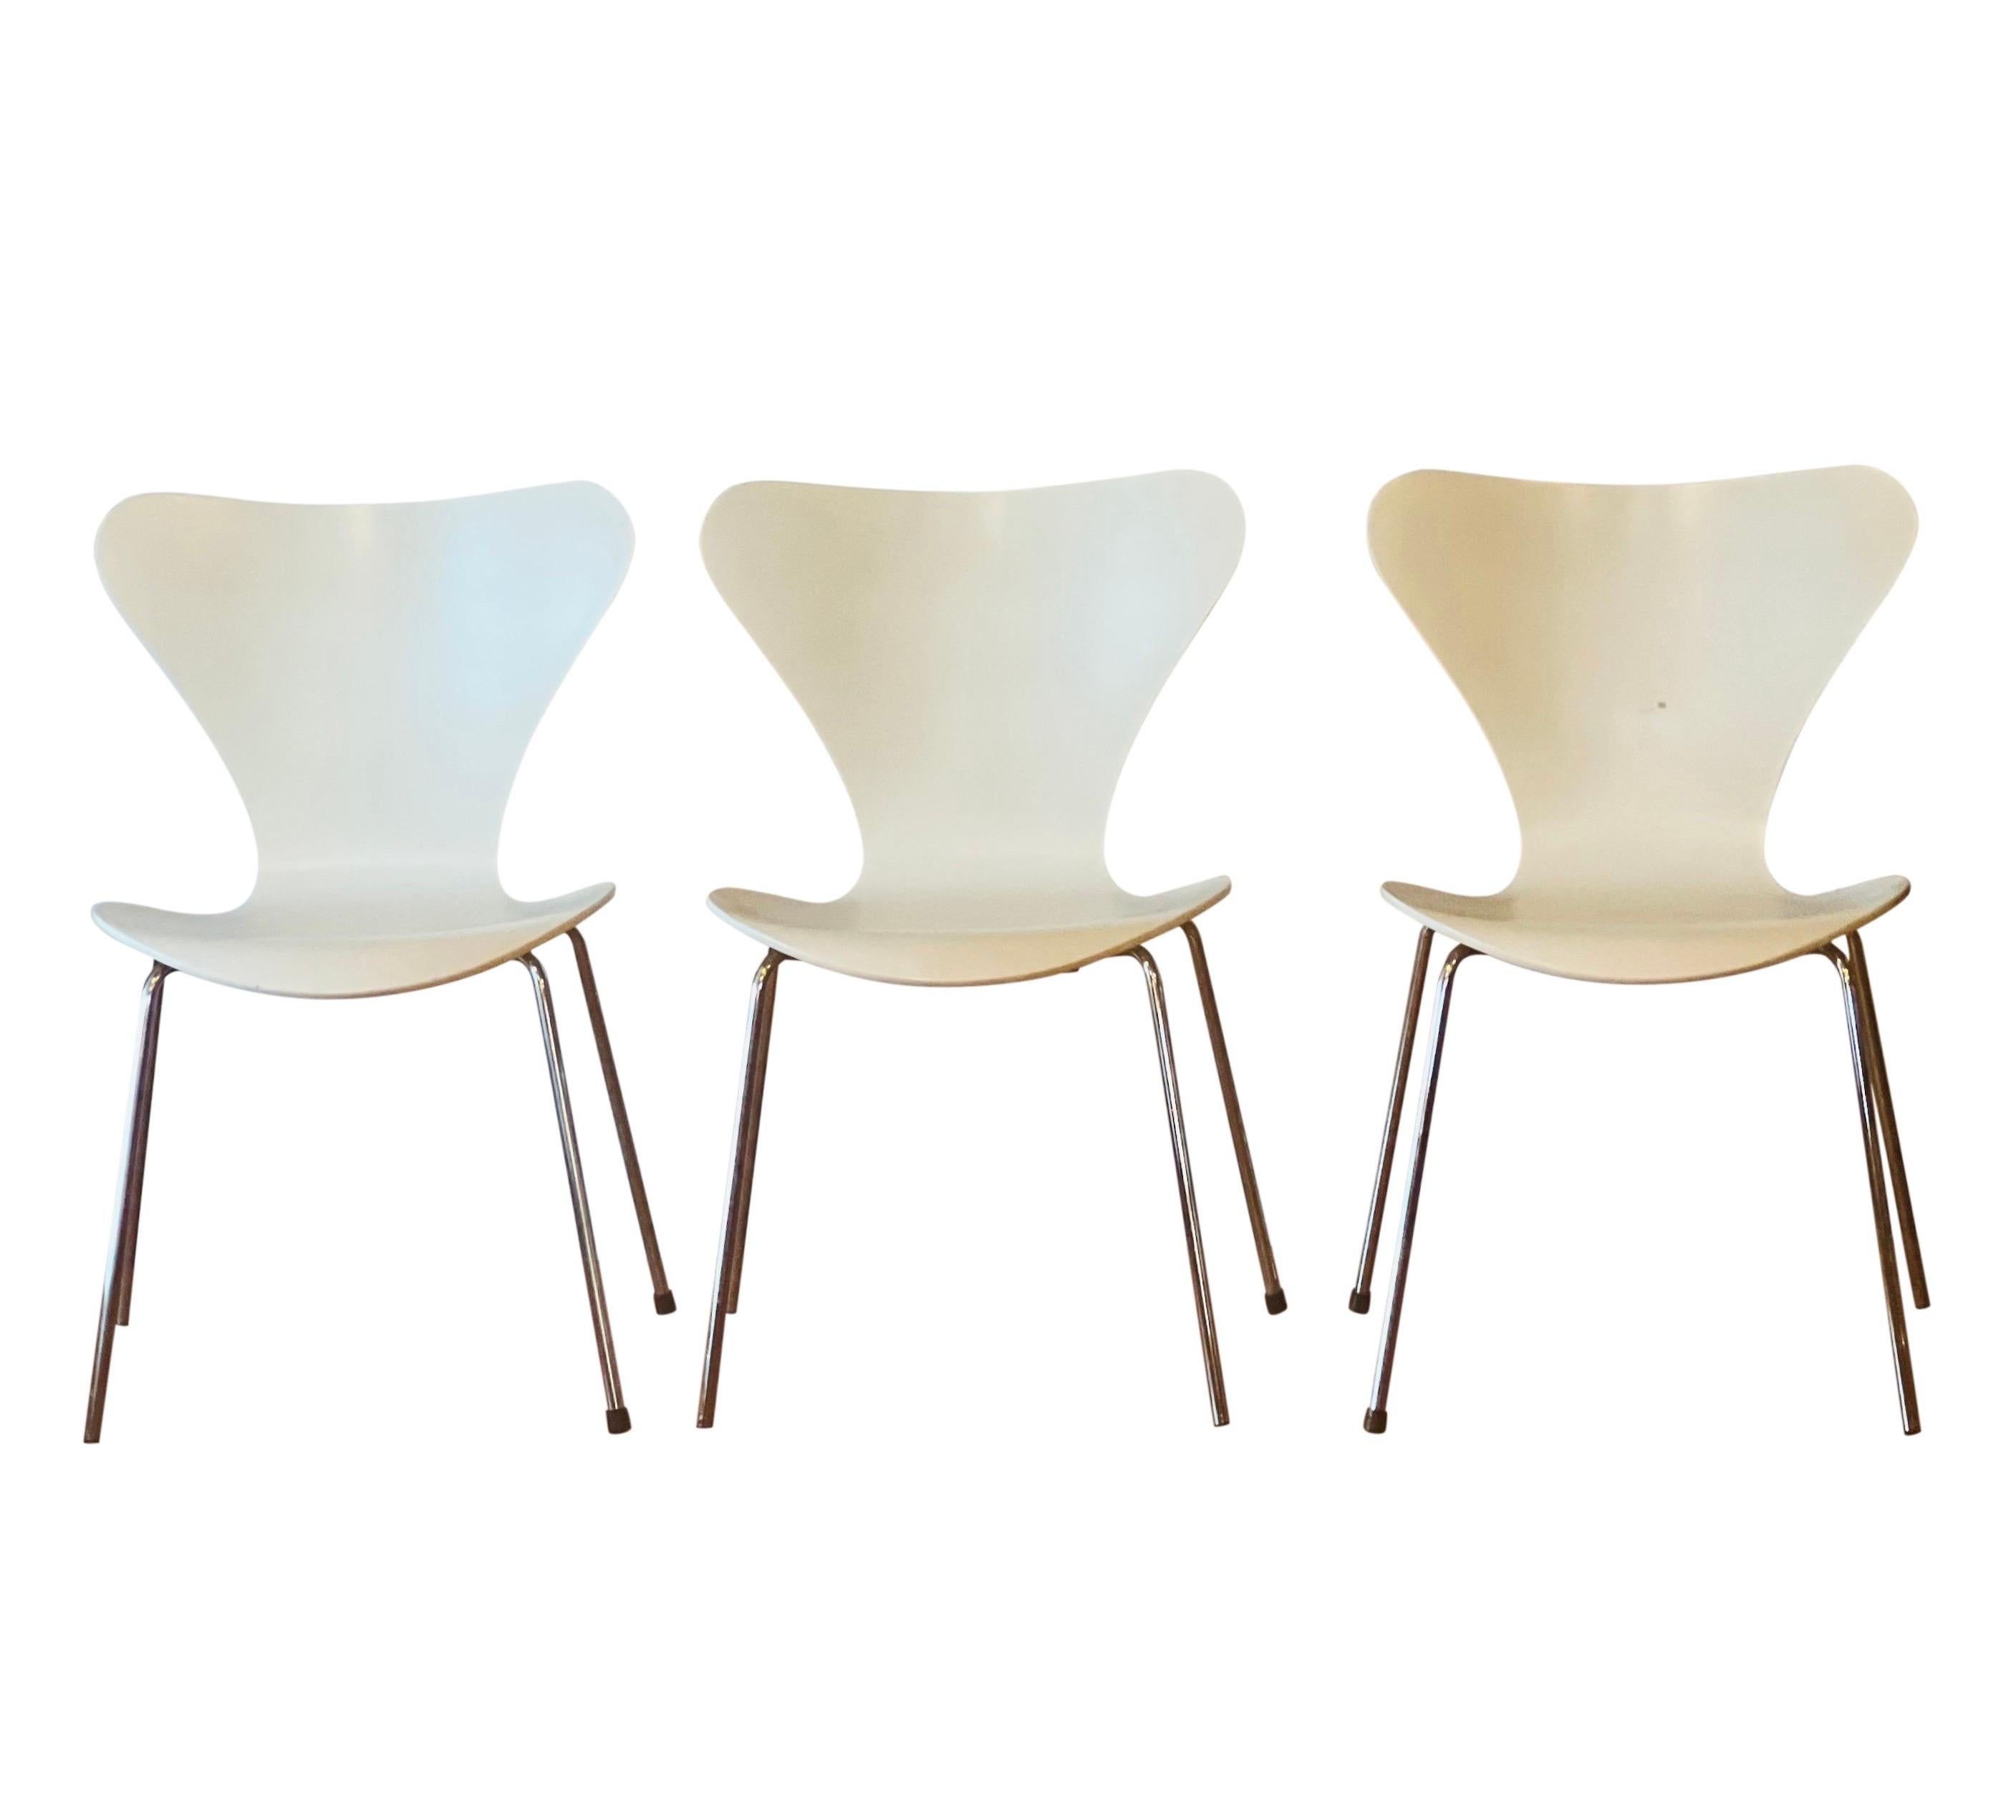 Late 20th Century Arne Jacobsen for Fritz Hansen Series 7 Chairs in White, Set of 4